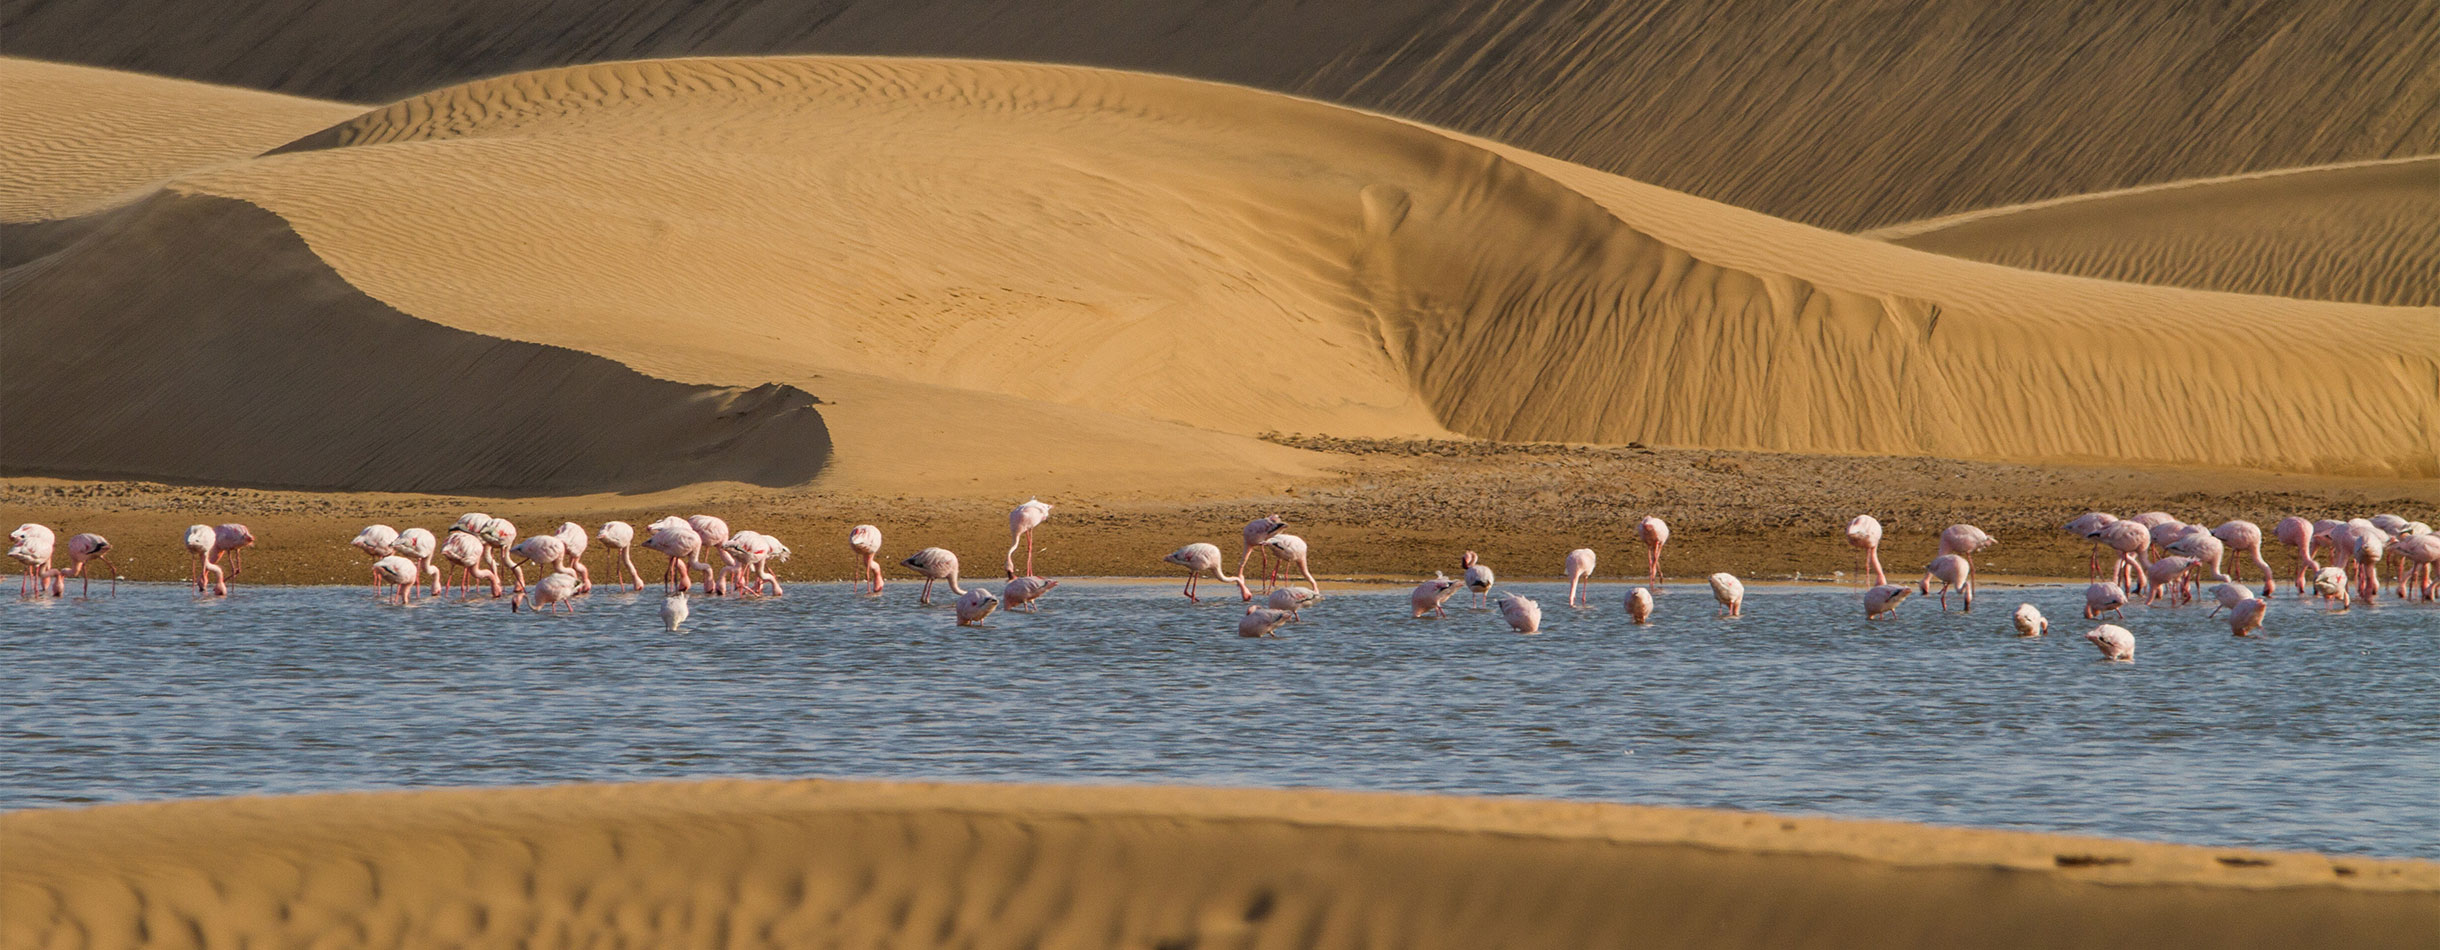 Flock of flamingos in the lagoons between sand dunes of the Namib desert near Walvis Bay in Namibia